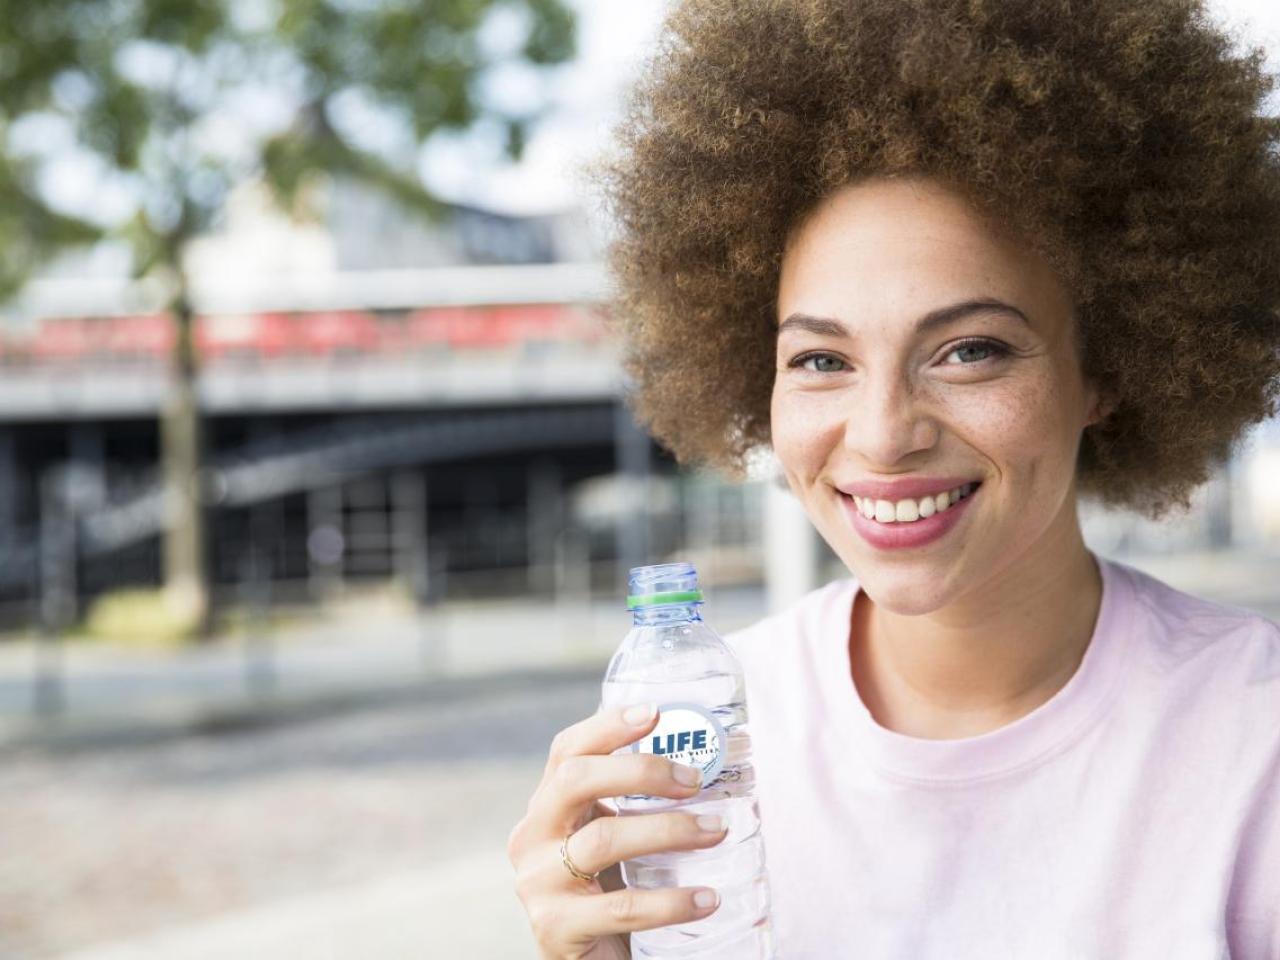 A smiling person holding a plastic bottle outside.